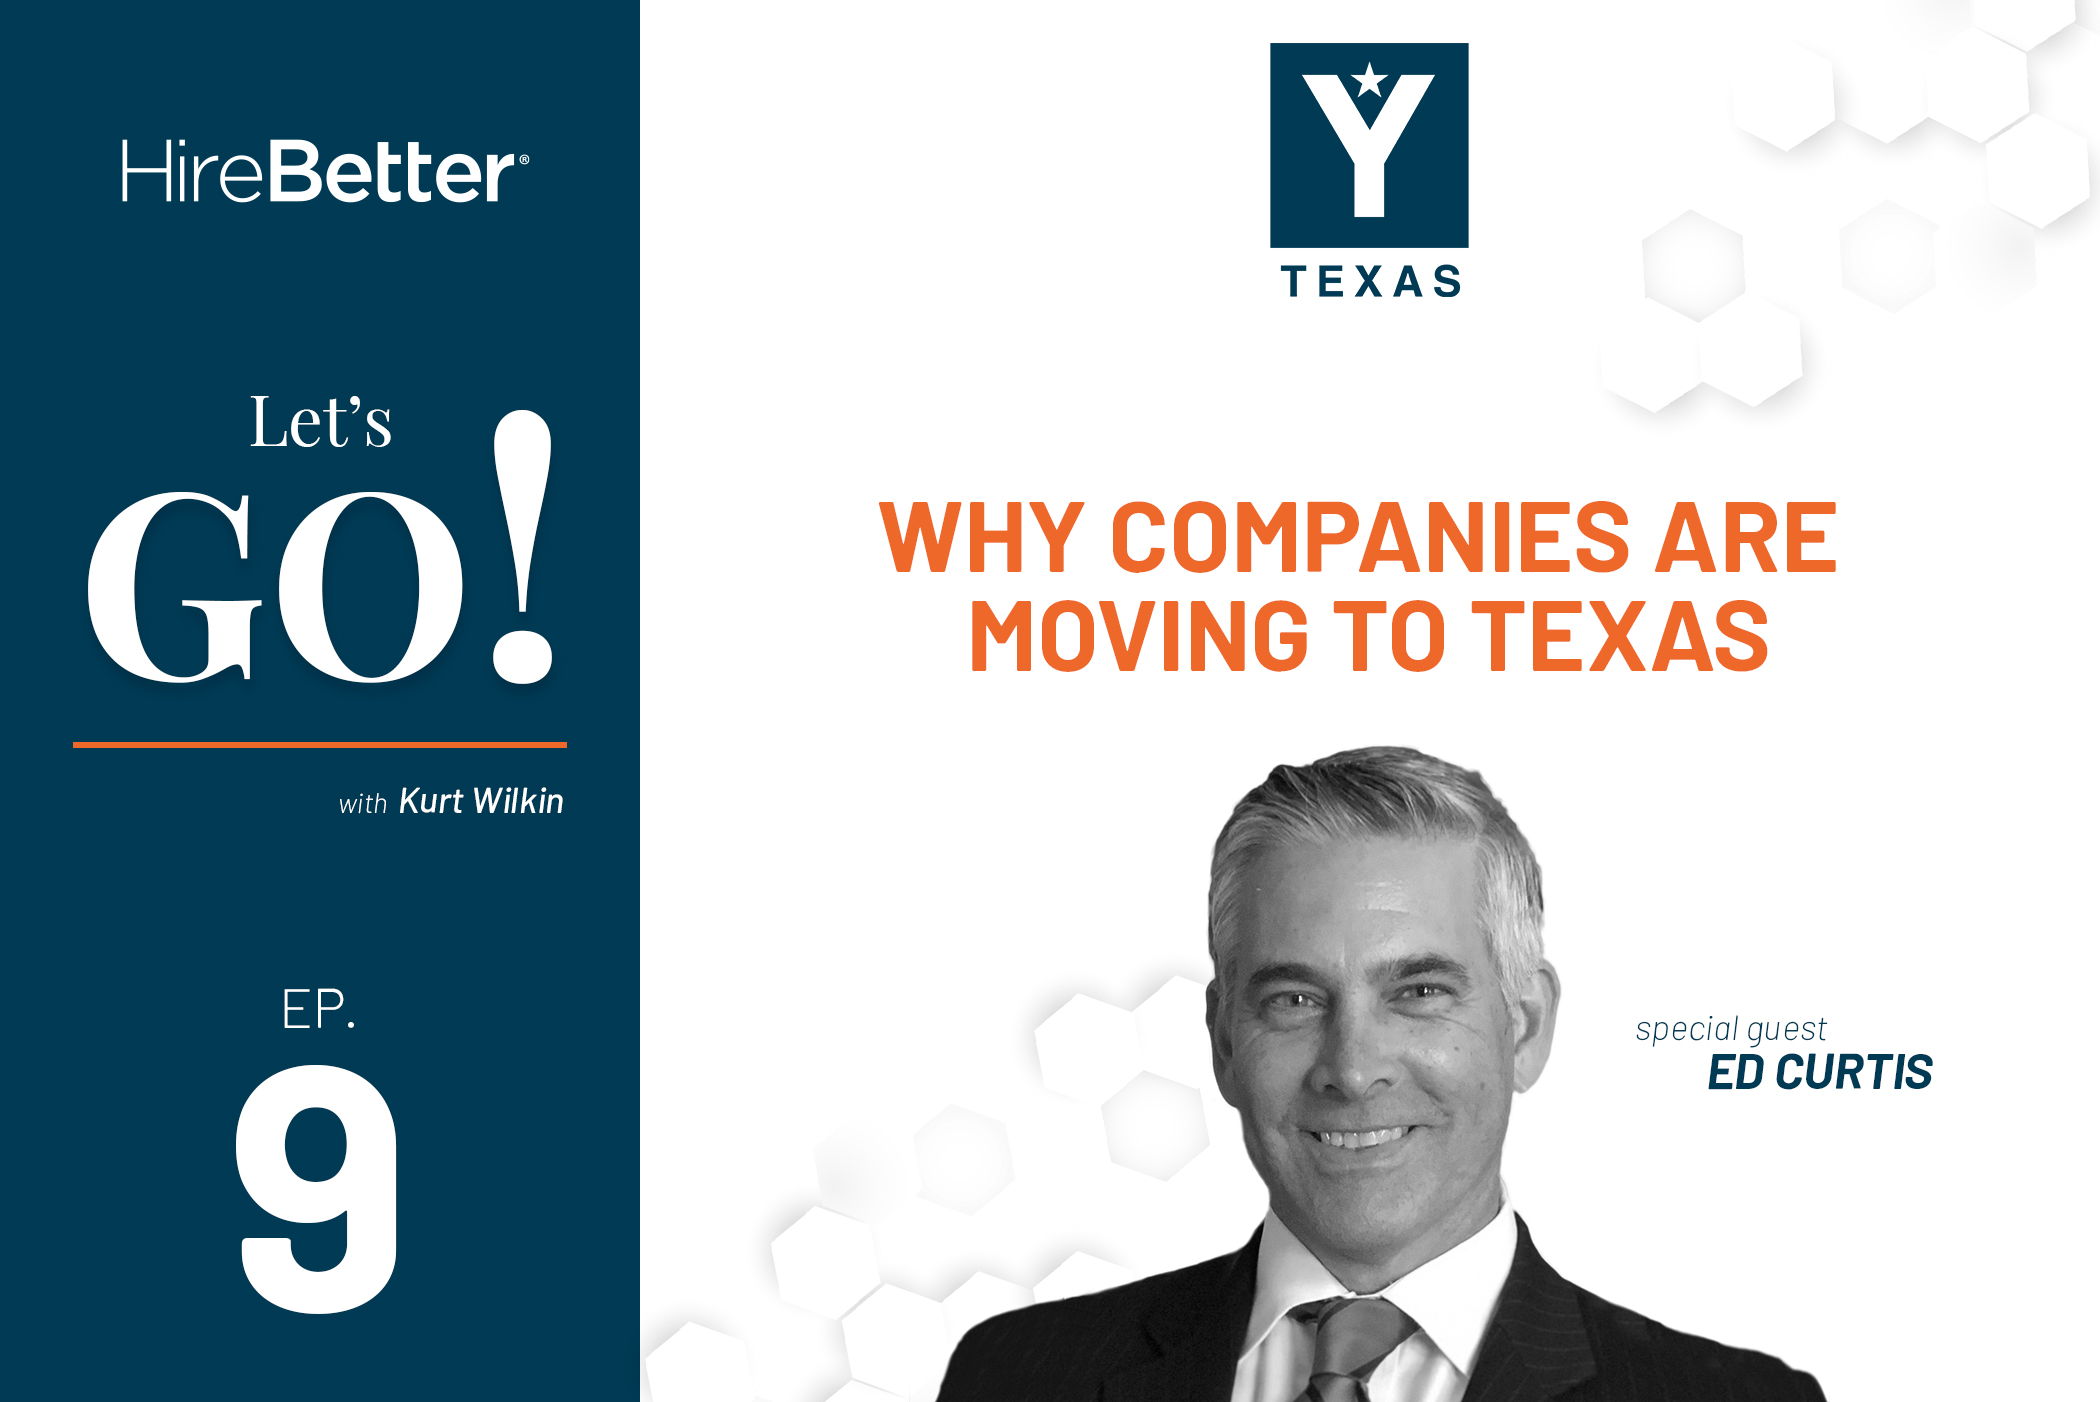 Ed Curtis of Y Texas discusses why business is booming in Texas